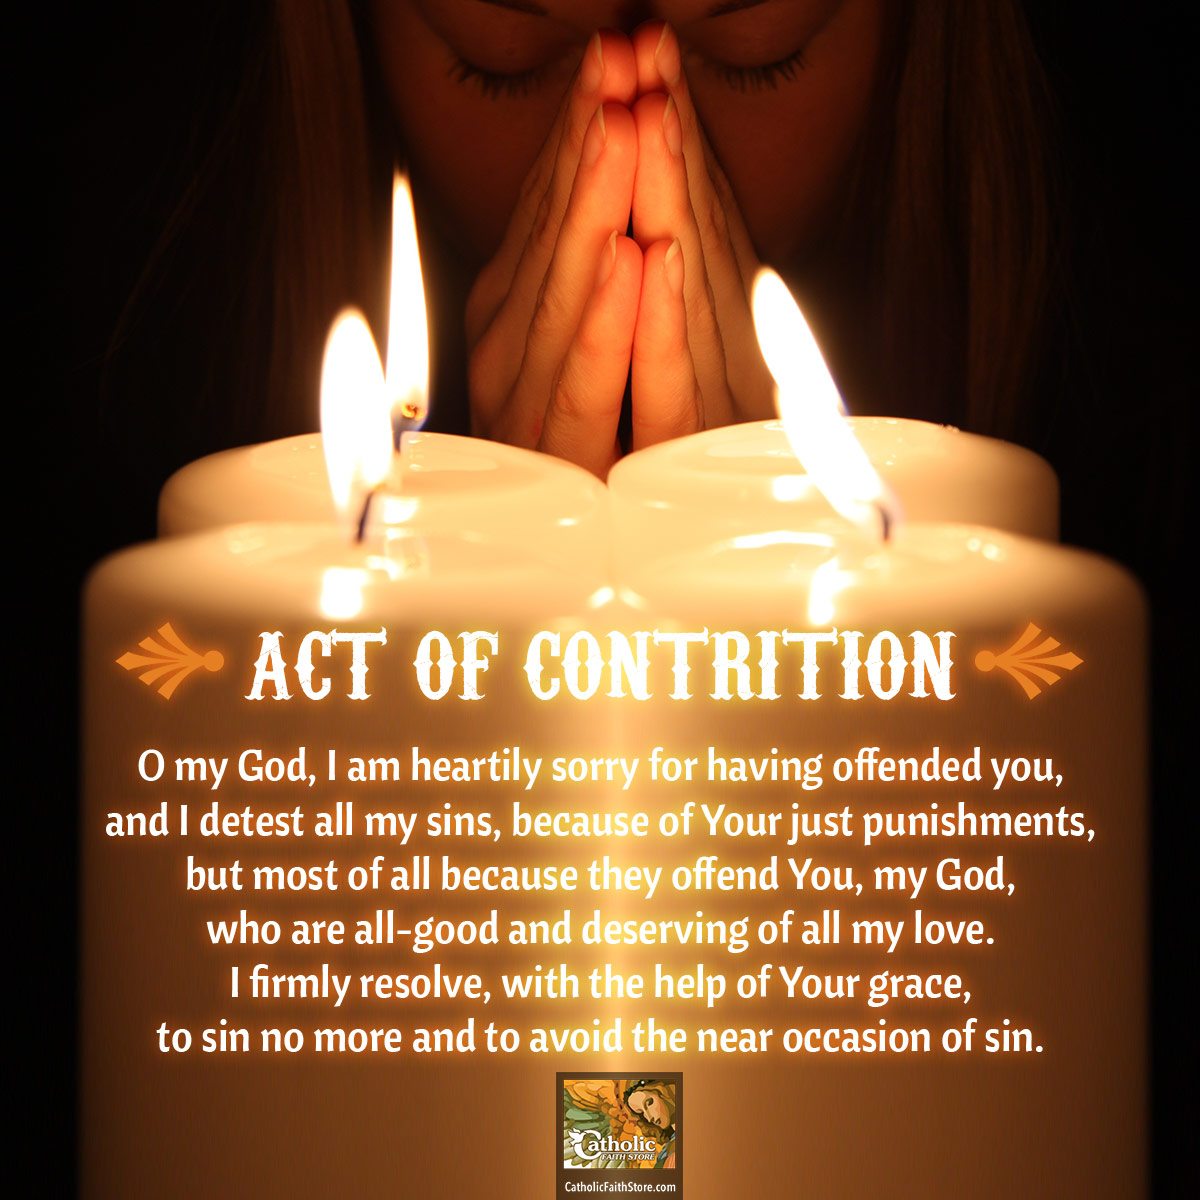 What Are The Words To The Catholic Act Of Contrition